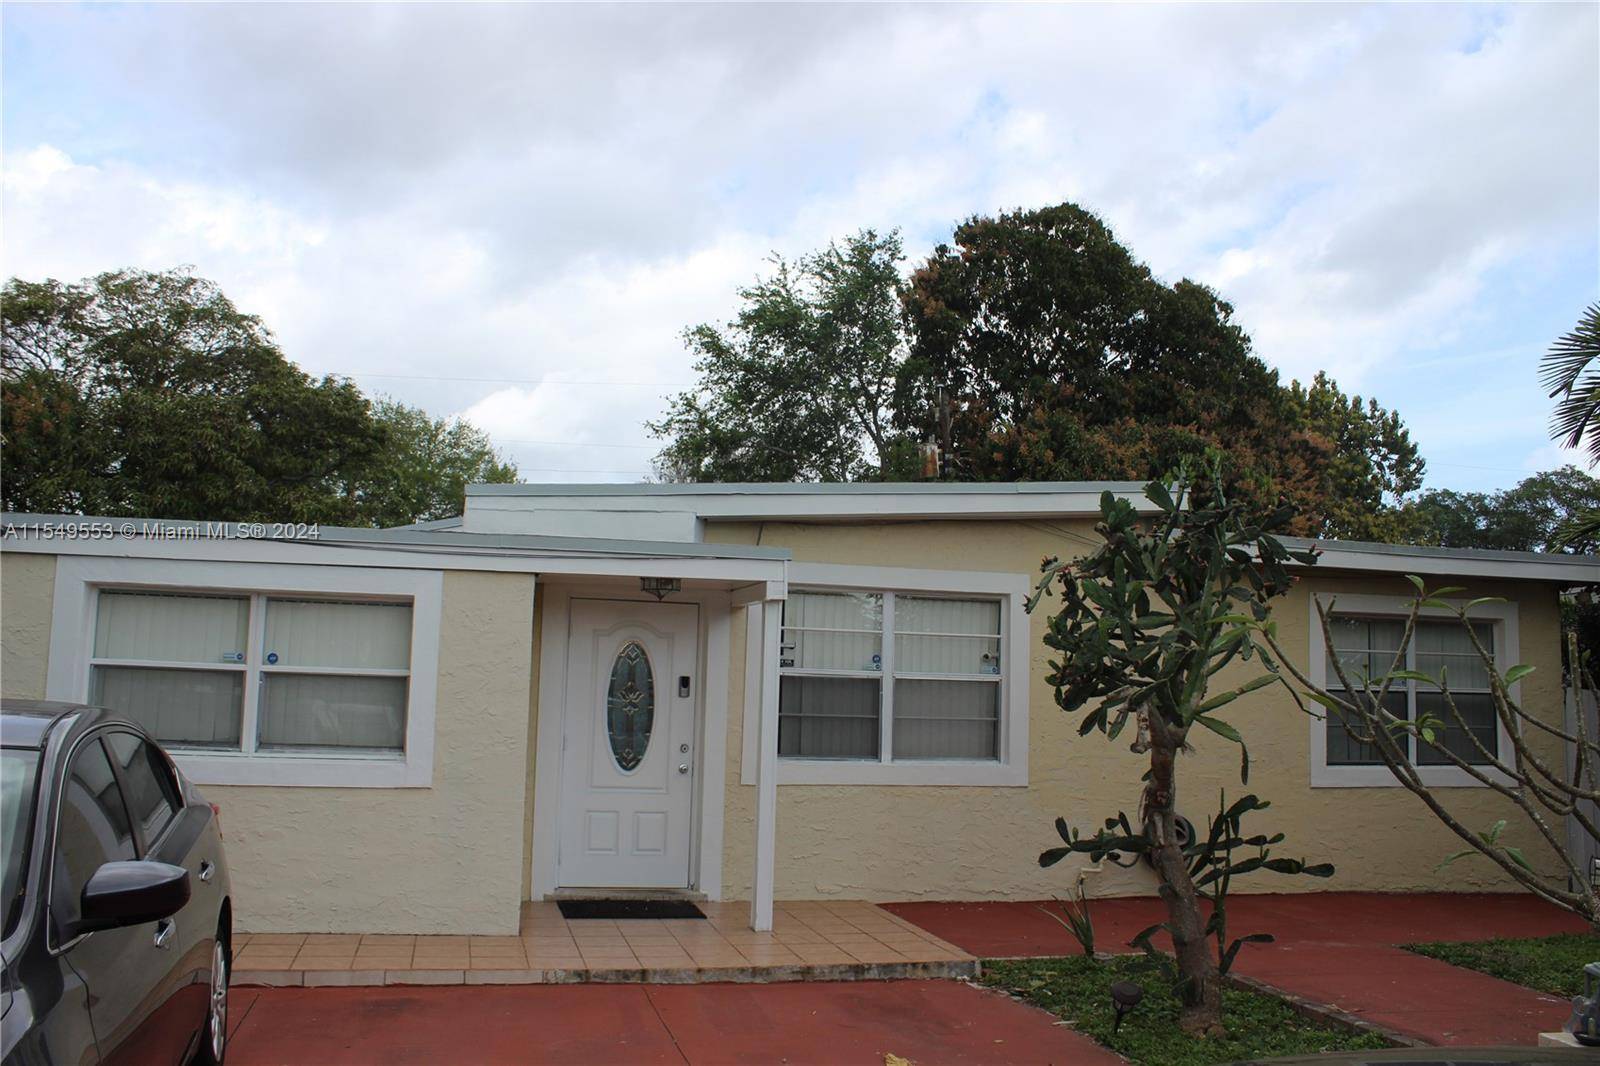 Excellent opportunity to own a wonderful home in the city of Miramar, centrally located with quick access to all major highways.